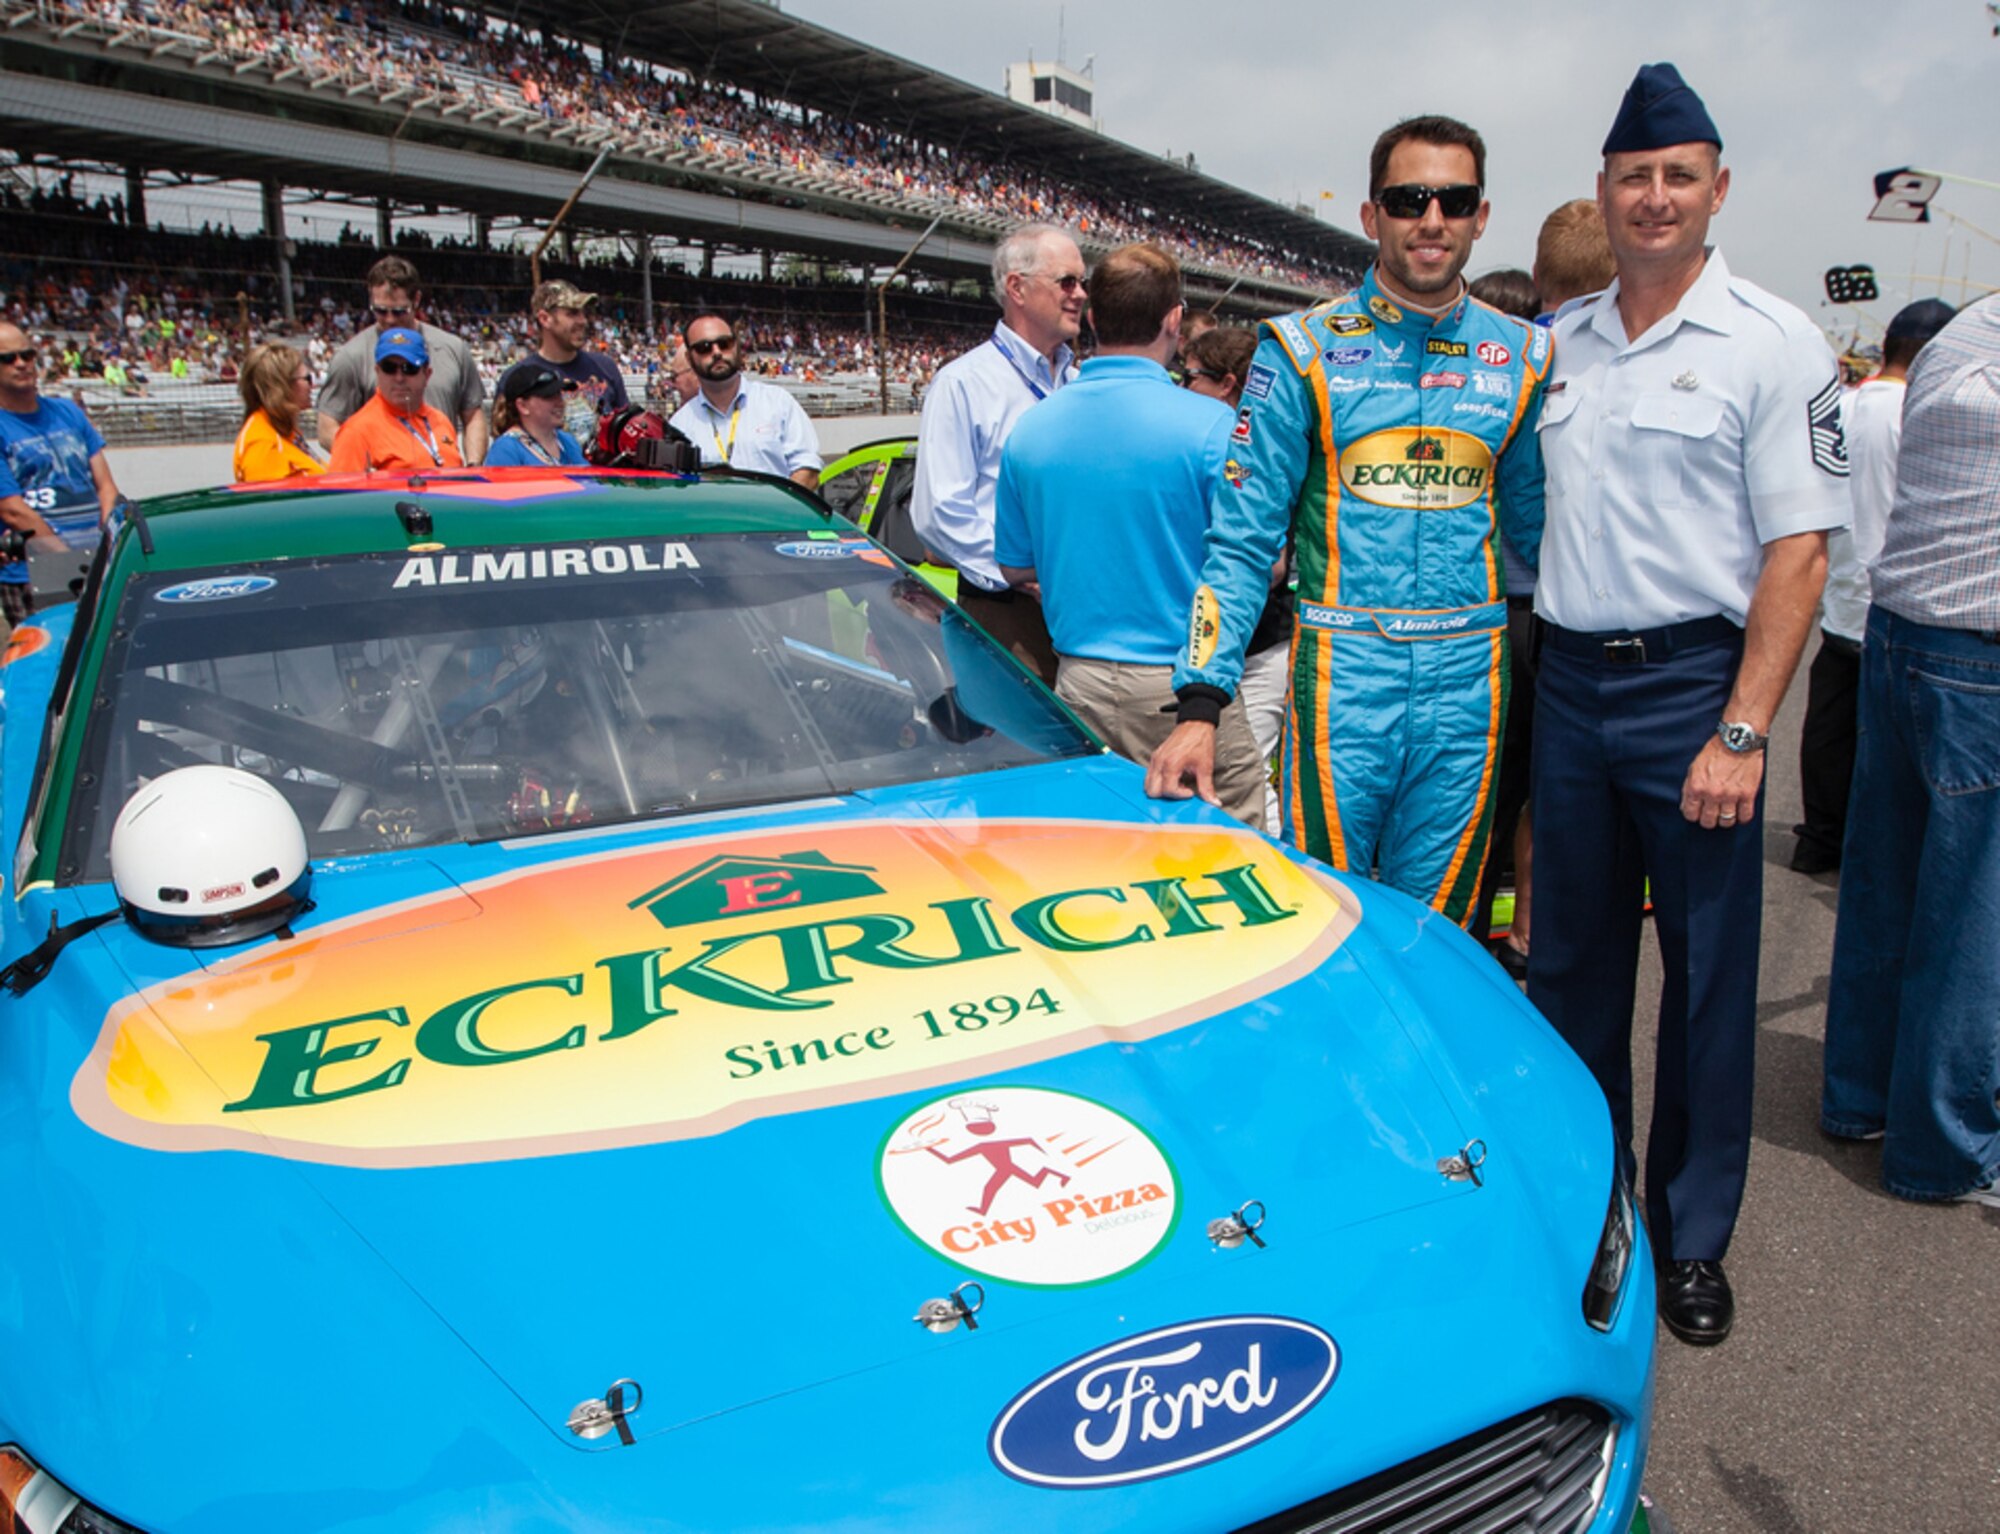 Chief Master Sergeant Raymond DeVite Jr., the command chief for the Air Force Research Laboratory, joins NASCAR driver Aric Almirola prior to the Brickyard 400 race event July 27 at Indianapolis Motor Speedway. The Air Force is a sponsor of car 43, owned by Richard
Petty Motorsports.  The Air Force partners with NASCAR as part of its
Science, Technology, Engineering and Math outreach, attracting mechanically
and technically inclined youth who attend these races. DeVite, along with AFRL commander Maj. Gen Tom Masiello, met with Air Force delayed entry program recruits and
participated in a pre-race swearing-in ceremony for the future Airmen.
(Photo courtesy of C. Brad Schloss)
